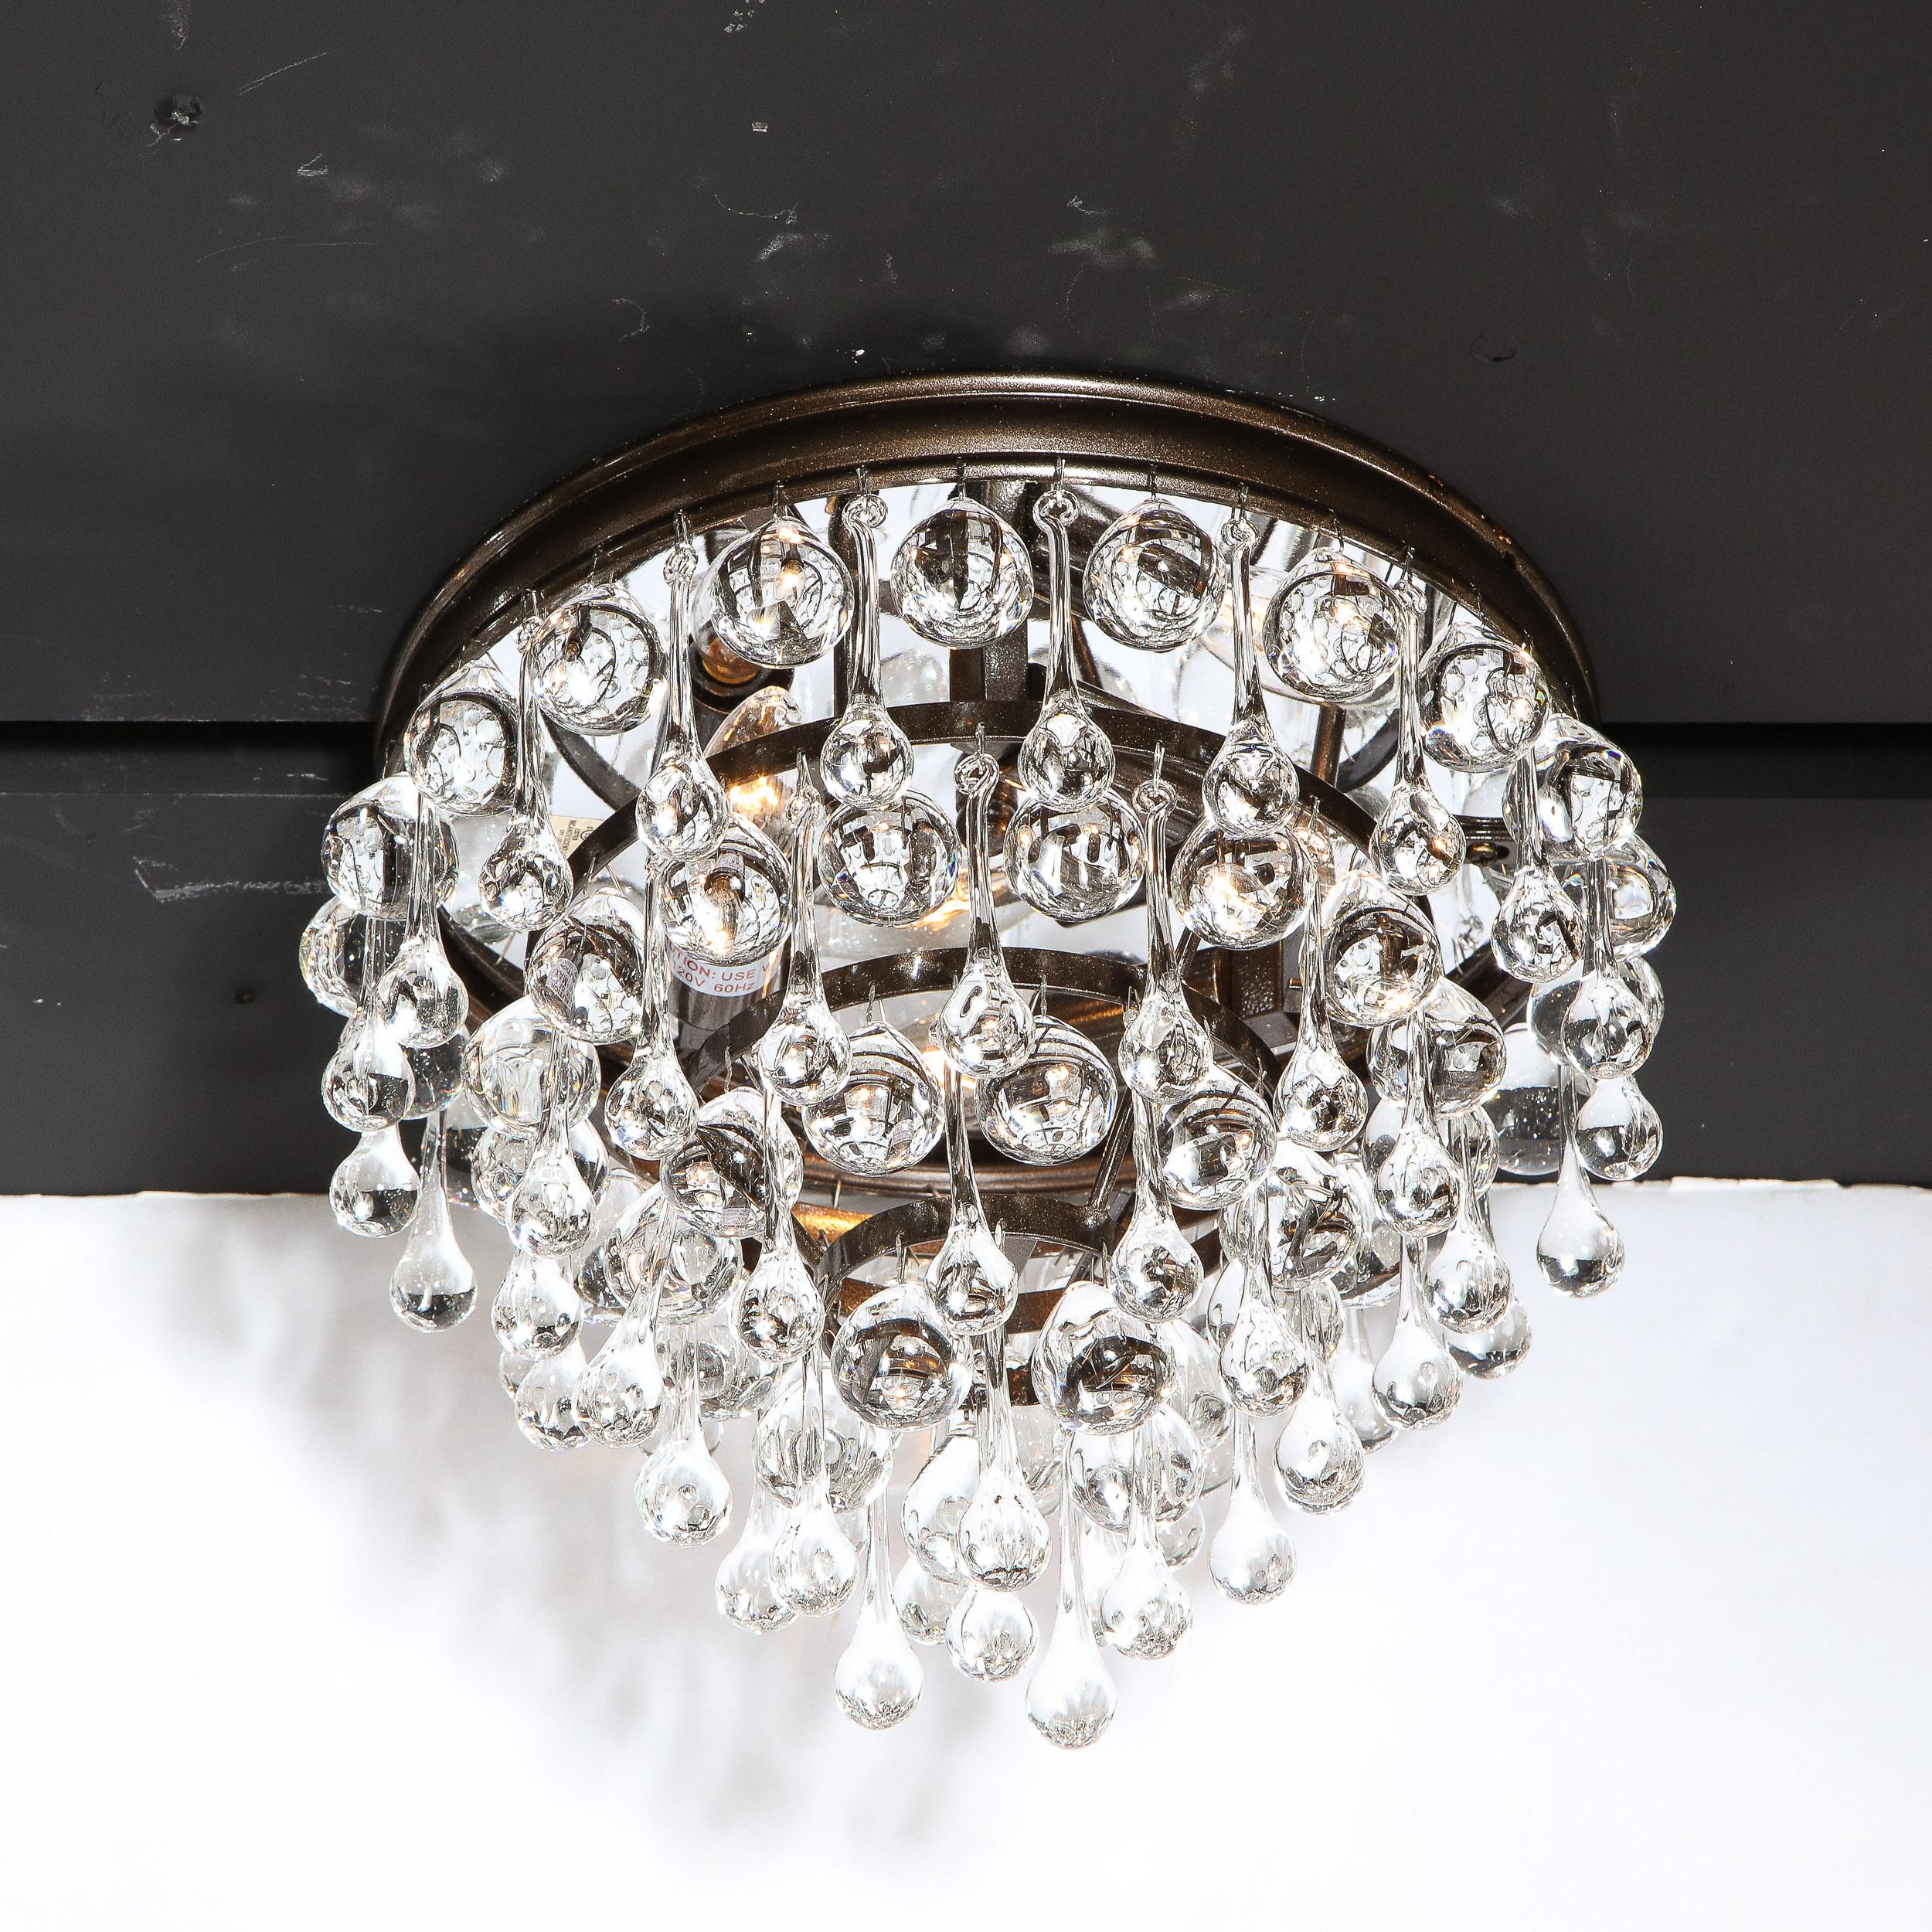 This stunning Hollywood Regency crystal teardrop flush mount chandelier features an abundance of hanging translucent glass tear drops suspended from a bronze frame consisting of six graduated concentric circular rows- imbuing the piece with a subtle